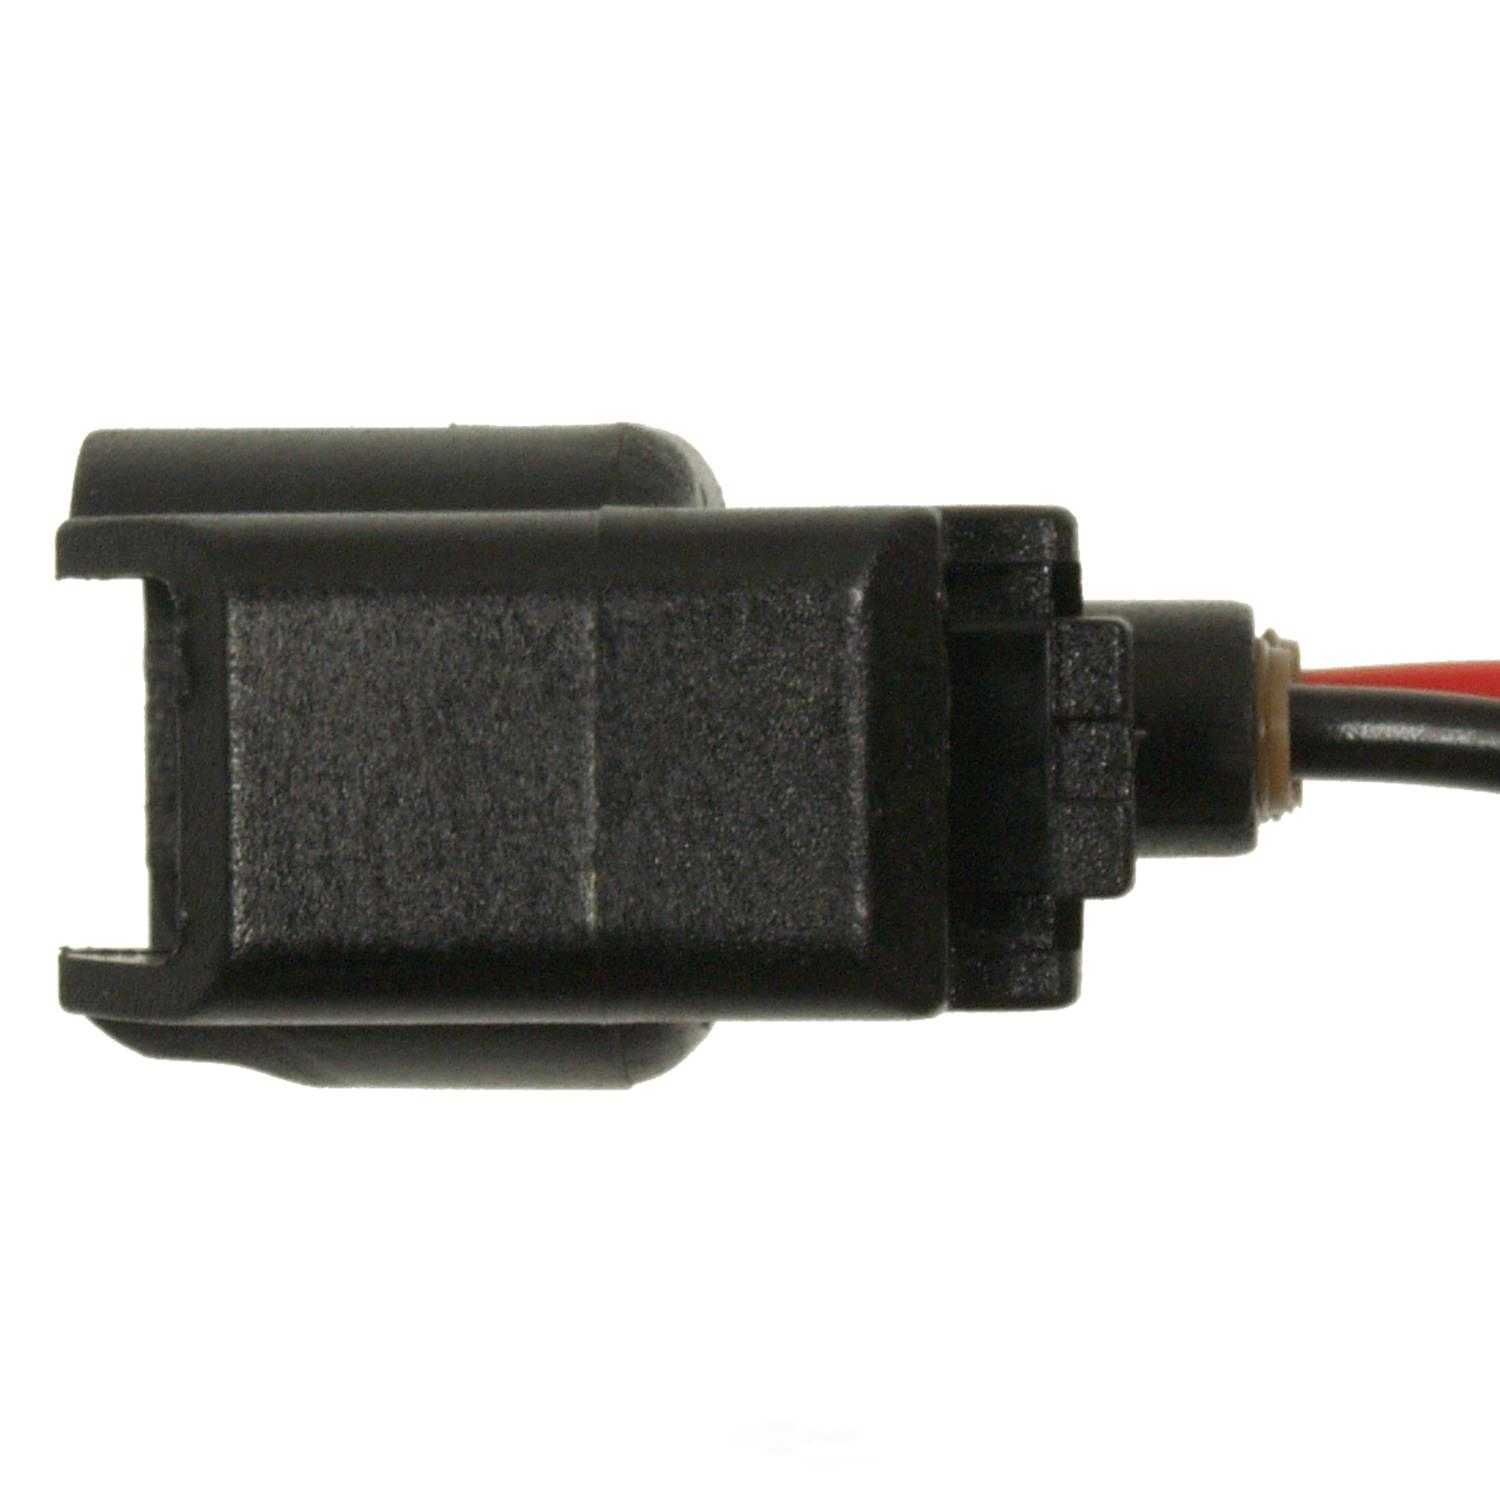 STANDARD MOTOR PRODUCTS - Washer Fluid Level Sensor Connector - STA S-824